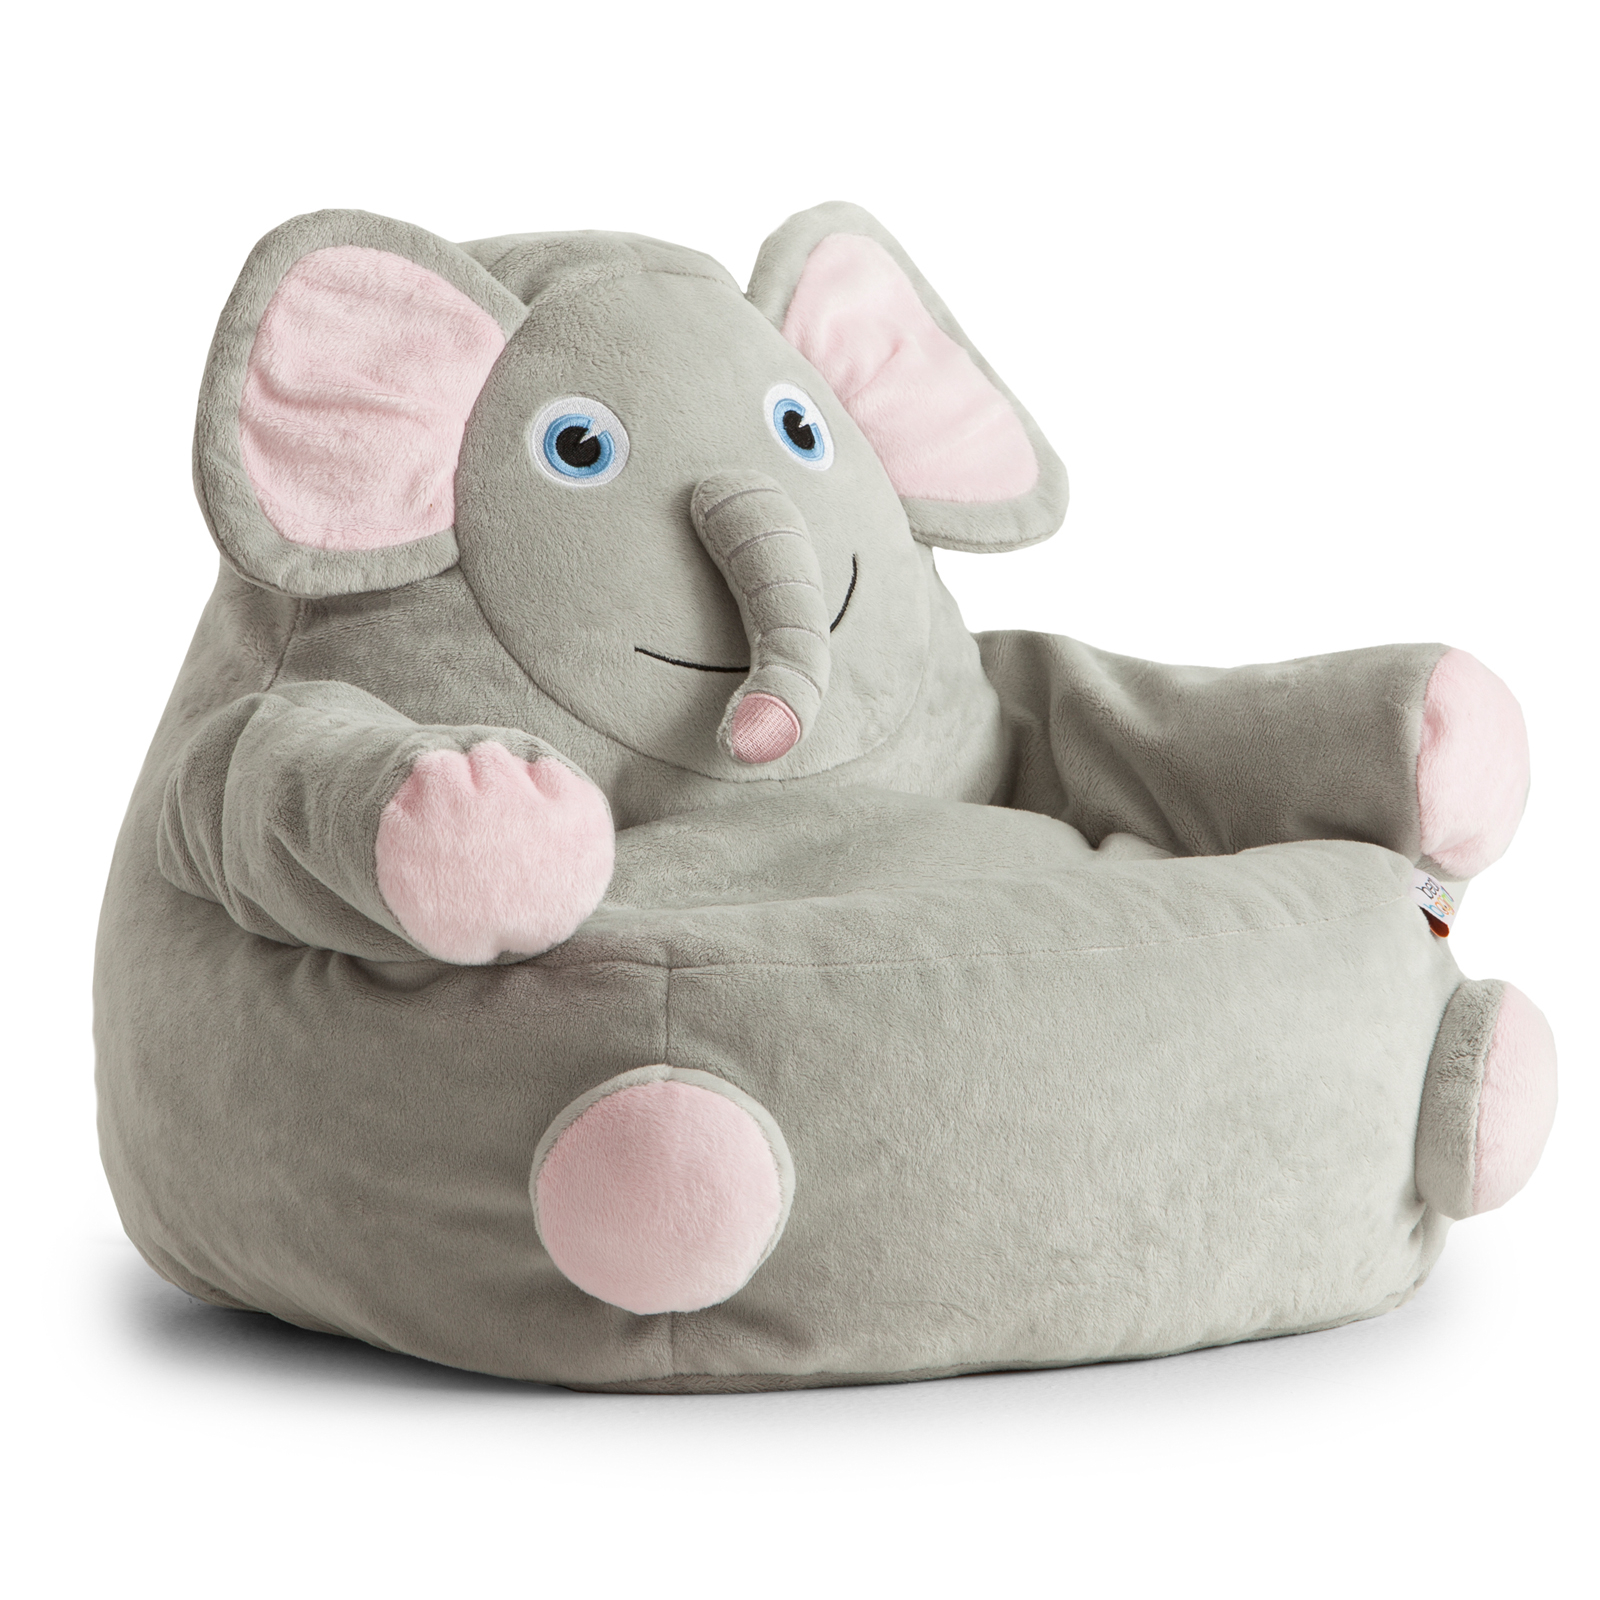 Bagimals Comfort Research Bagimals Arm Chair Bean Bag - Elephant, Gray, Polyester Cover